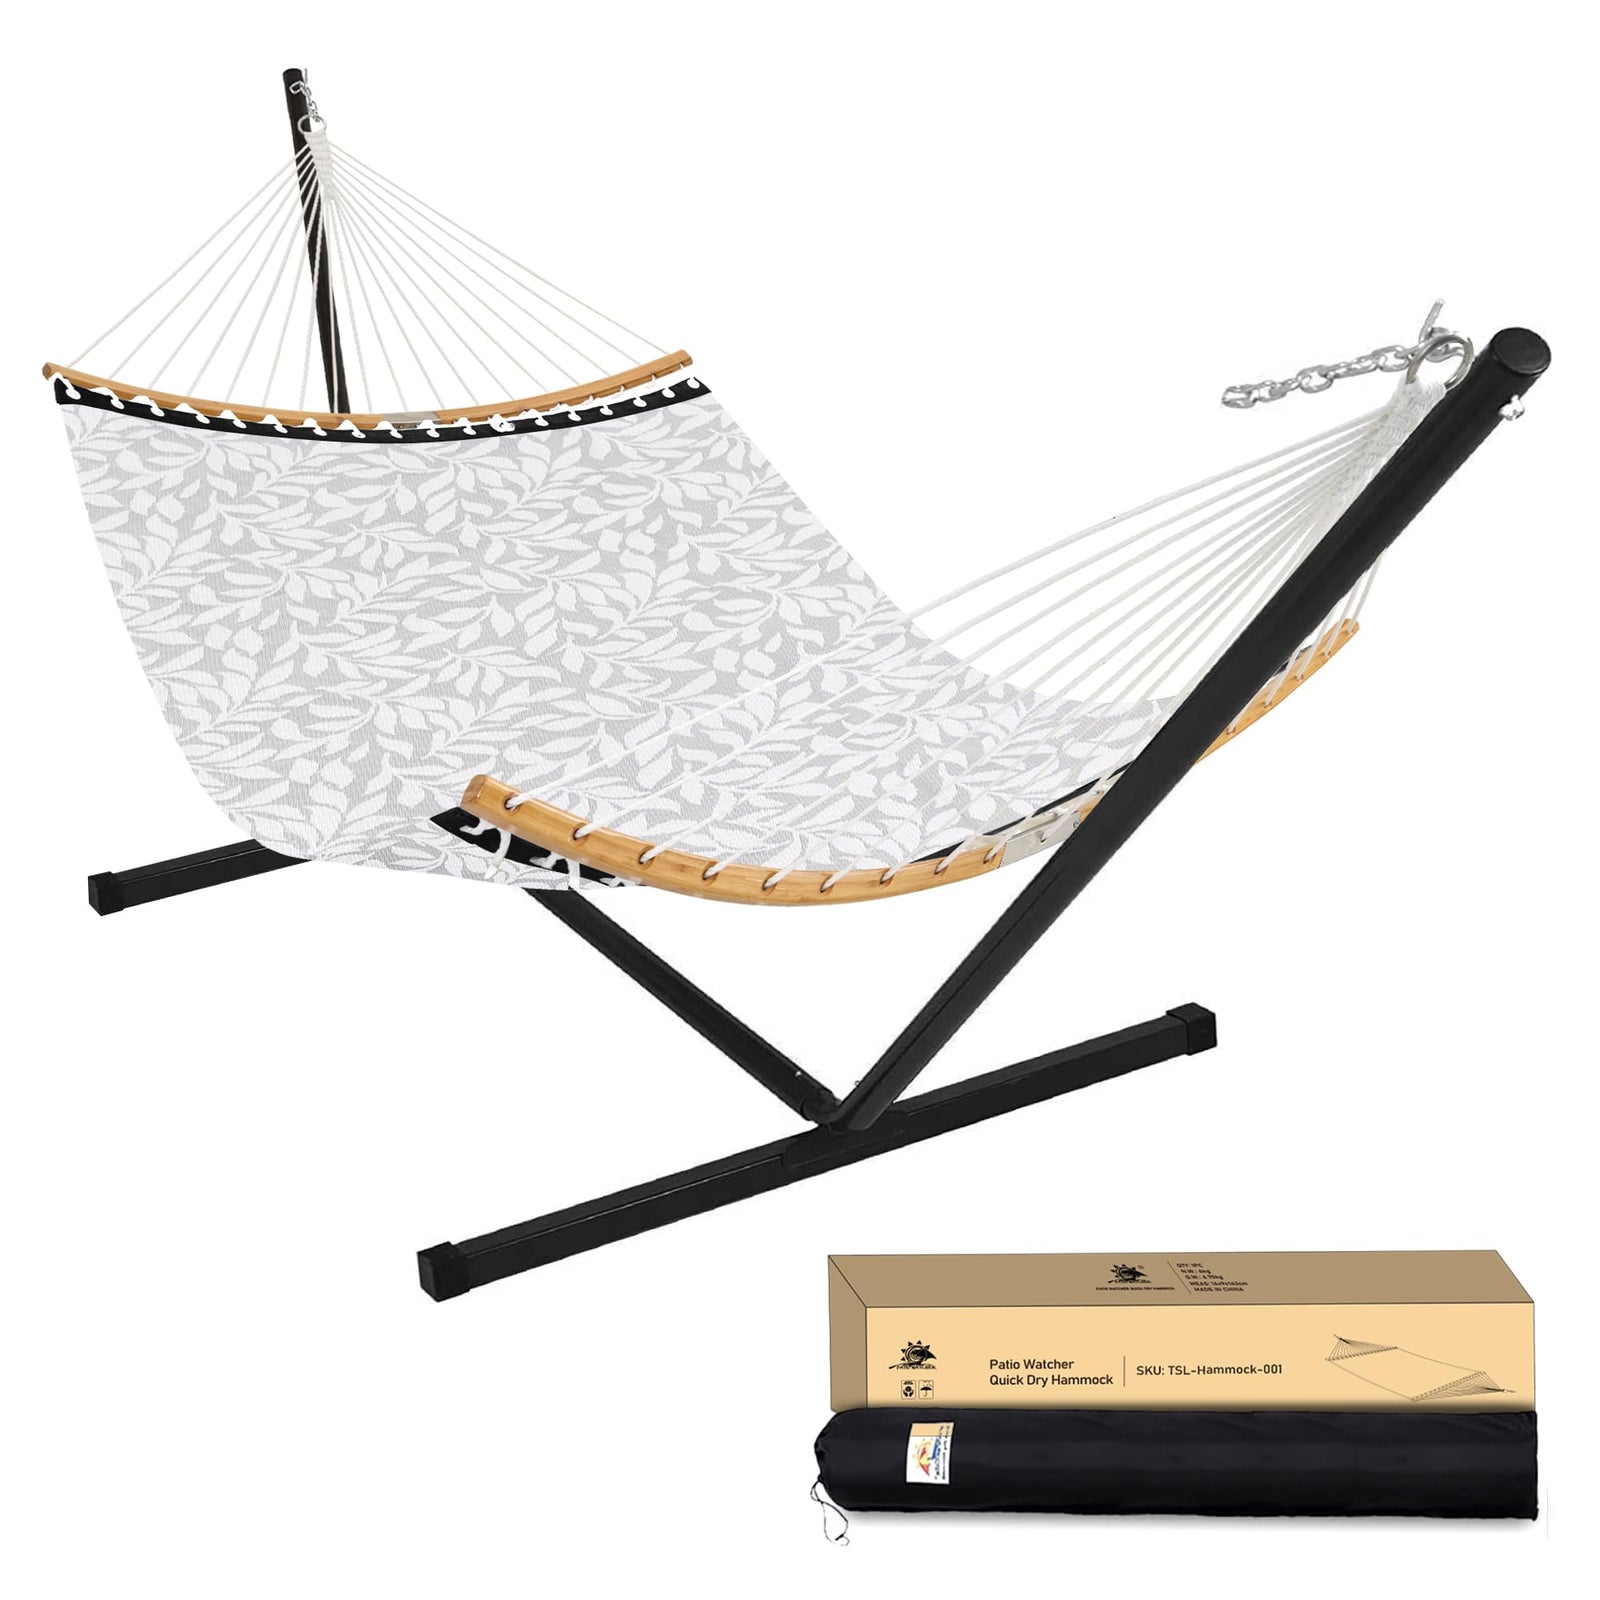 Patio Watcher 12 FT Double Quick Dry Hammock with Curved Bamboo Spreader Bar, Outdoor Patio Two Person Hammock with Portable Steel Stand,450 lbs Capacity, Grey White